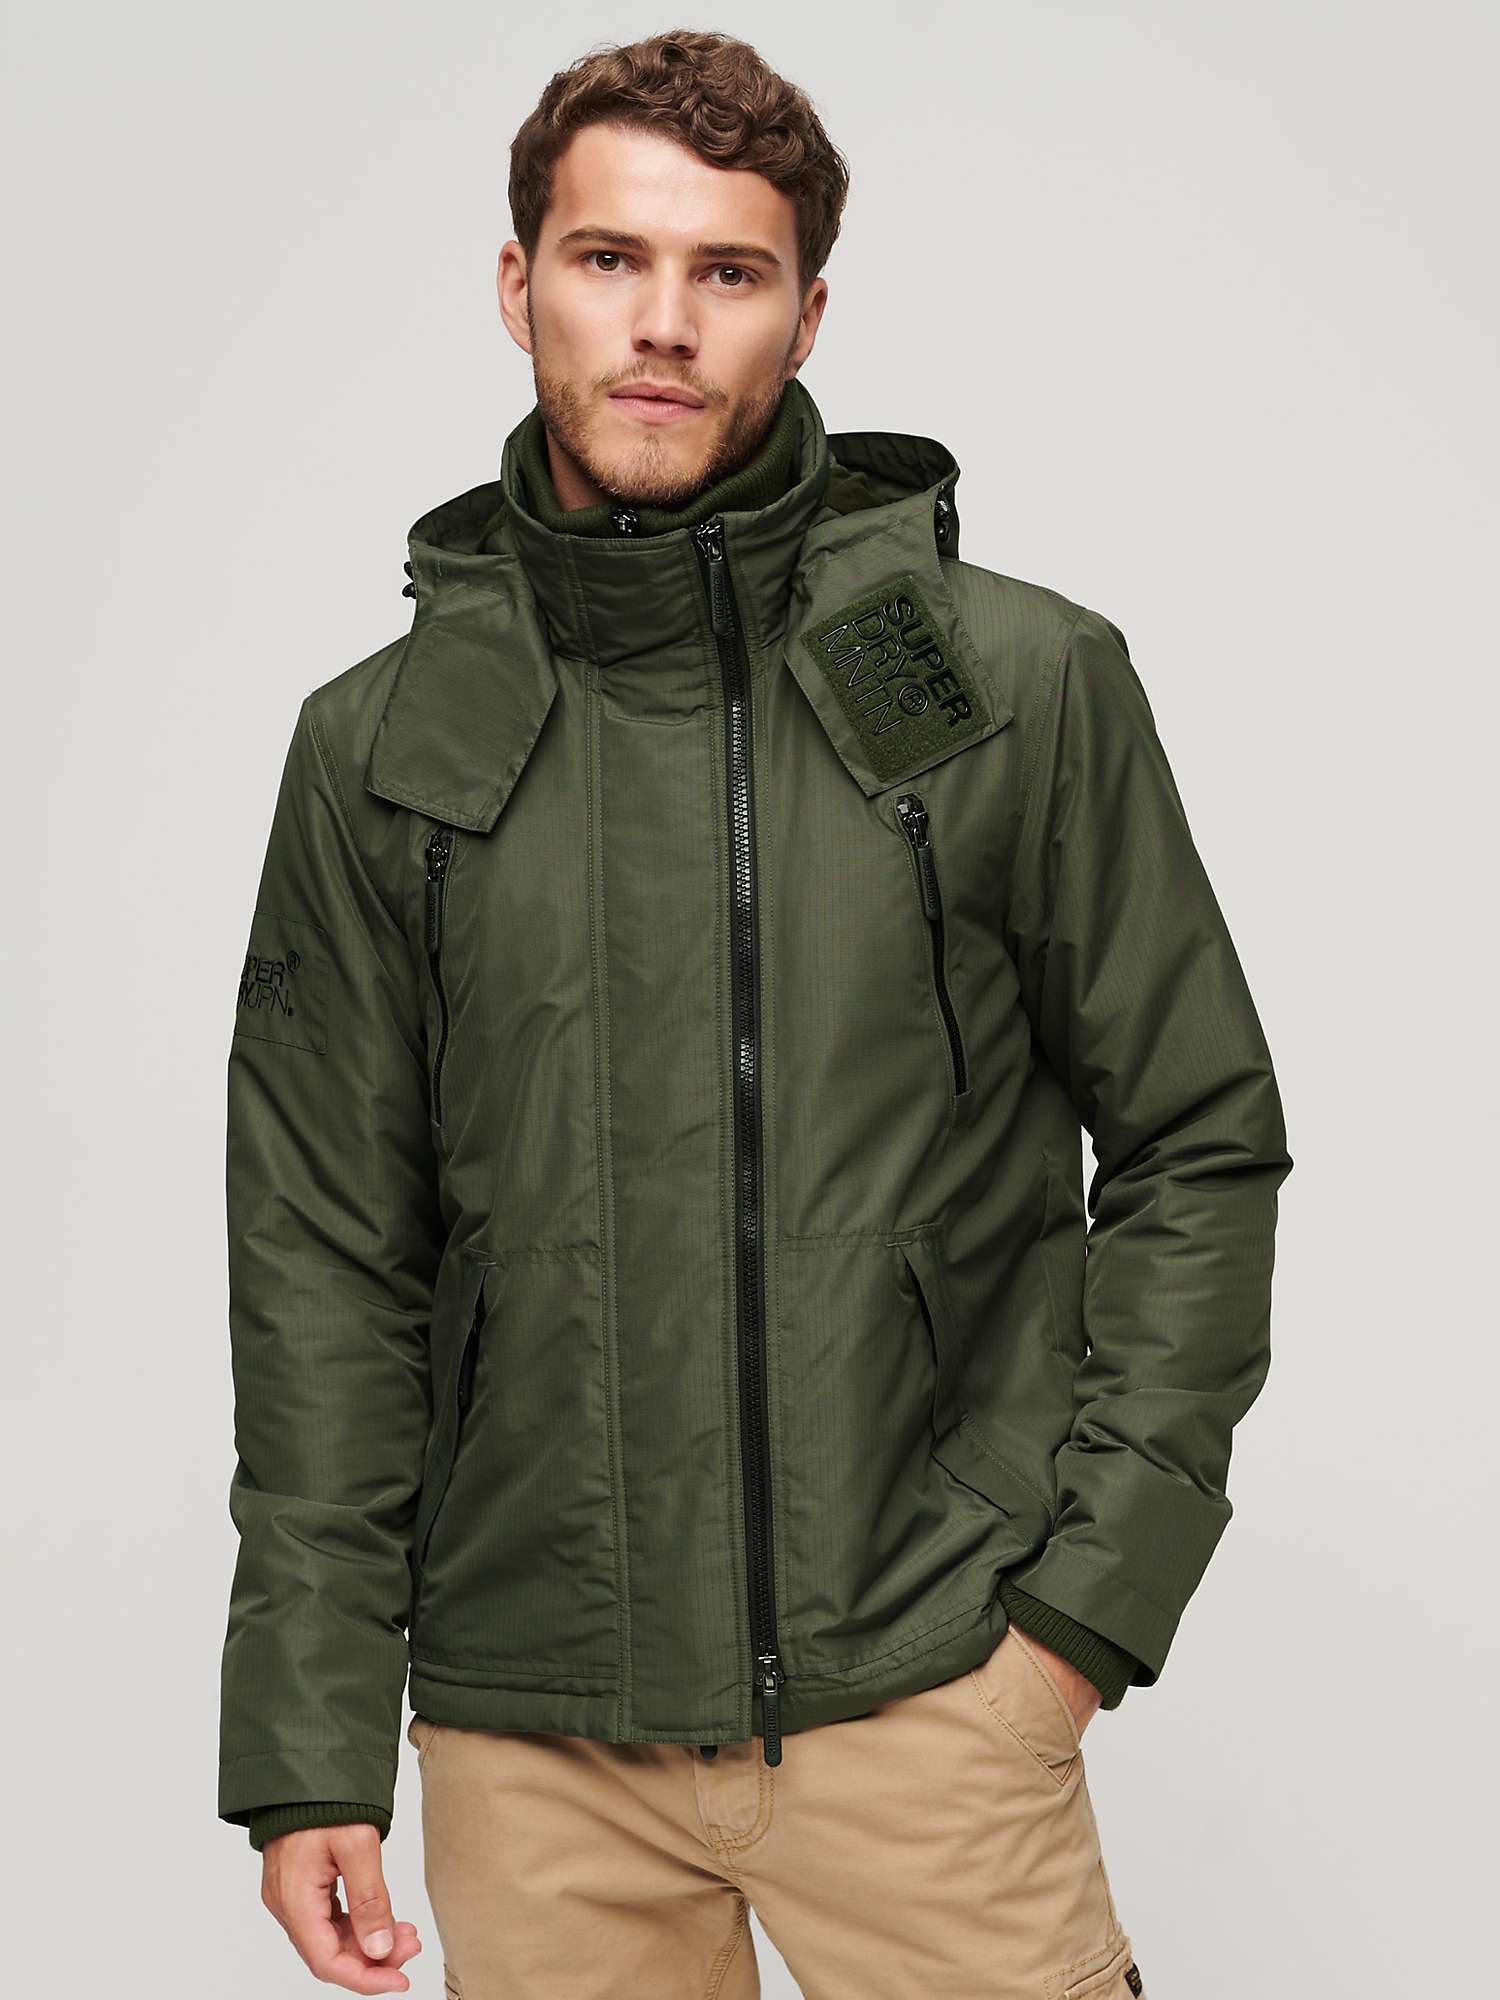 Buy Superdry Mountain SD Windcheater Jacket Online at johnlewis.com